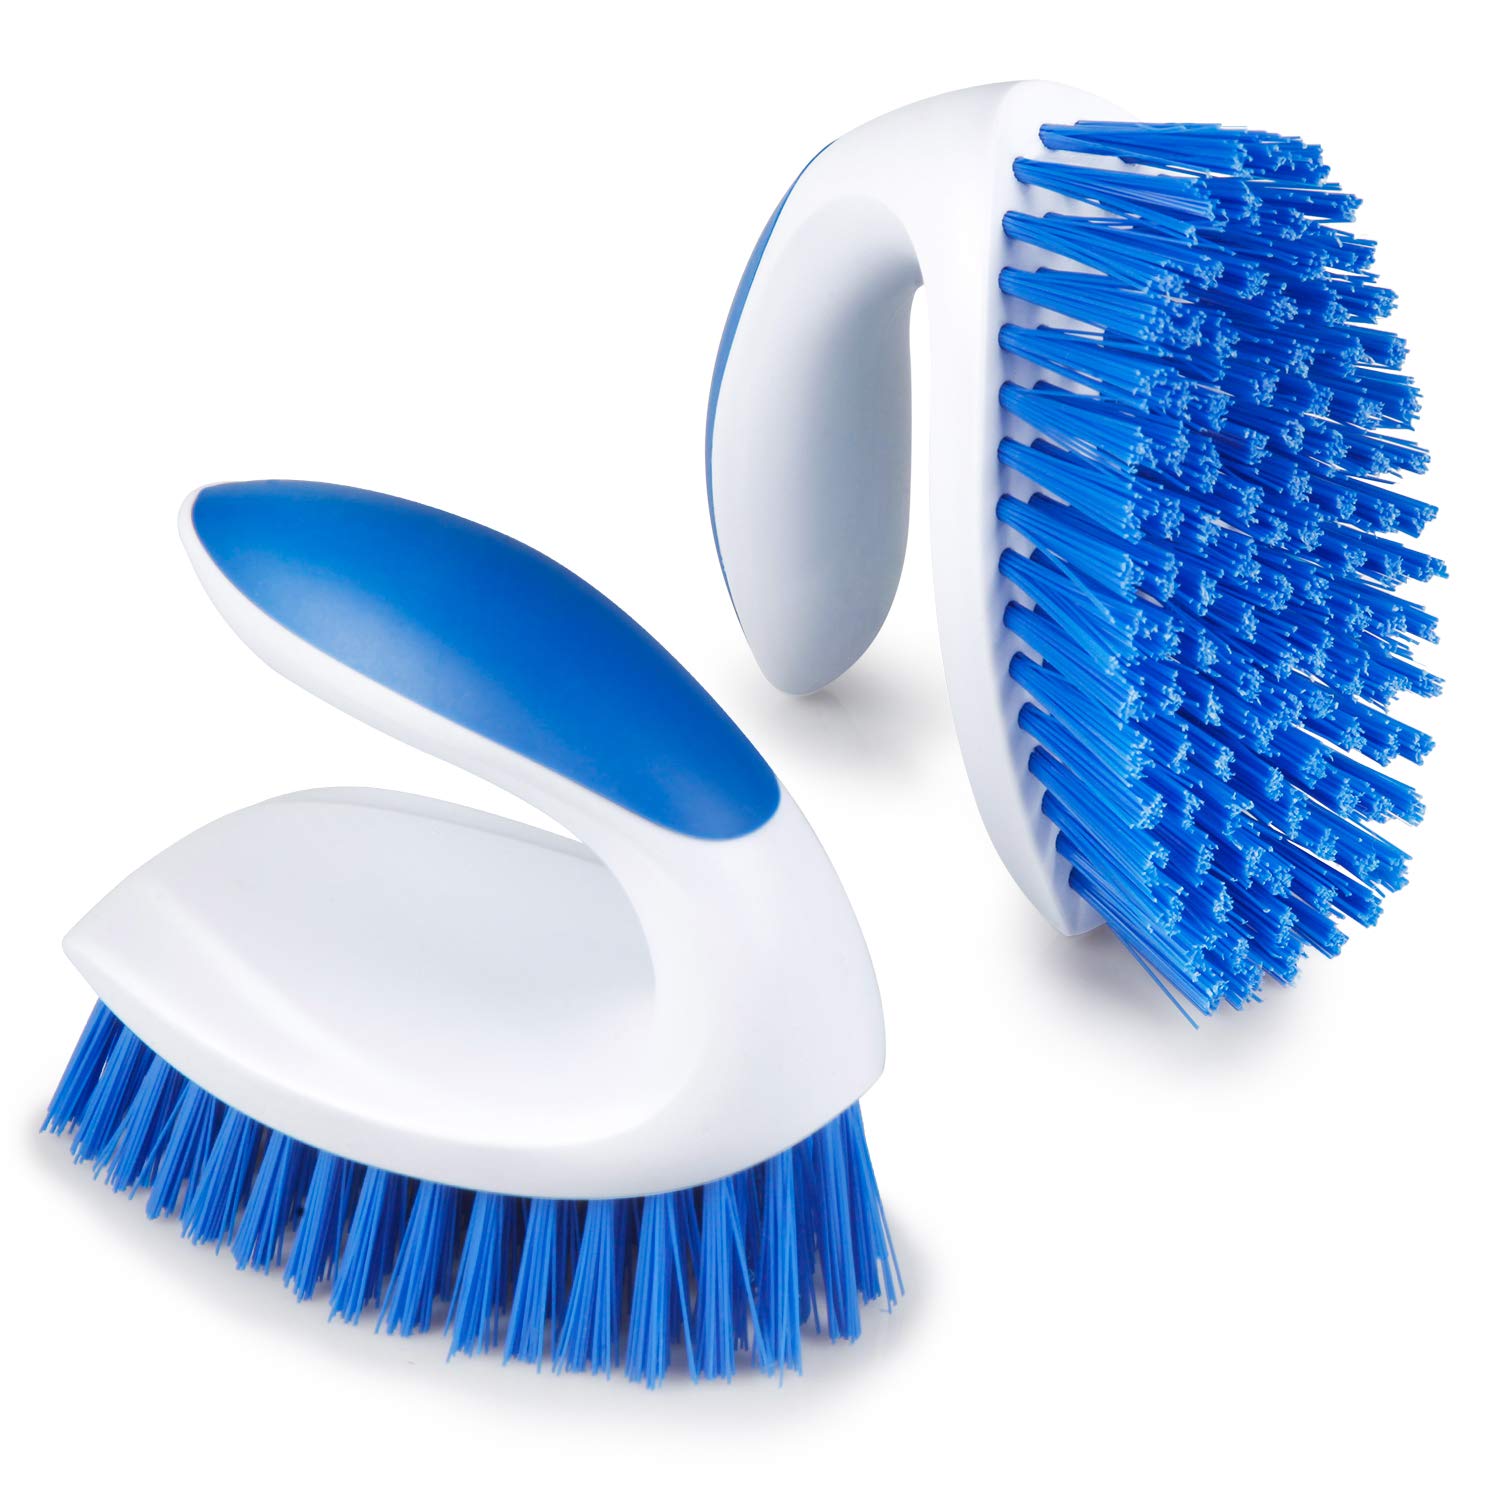 Cleaning Brush Essentials: Scrub Your Way to Spotlessness!